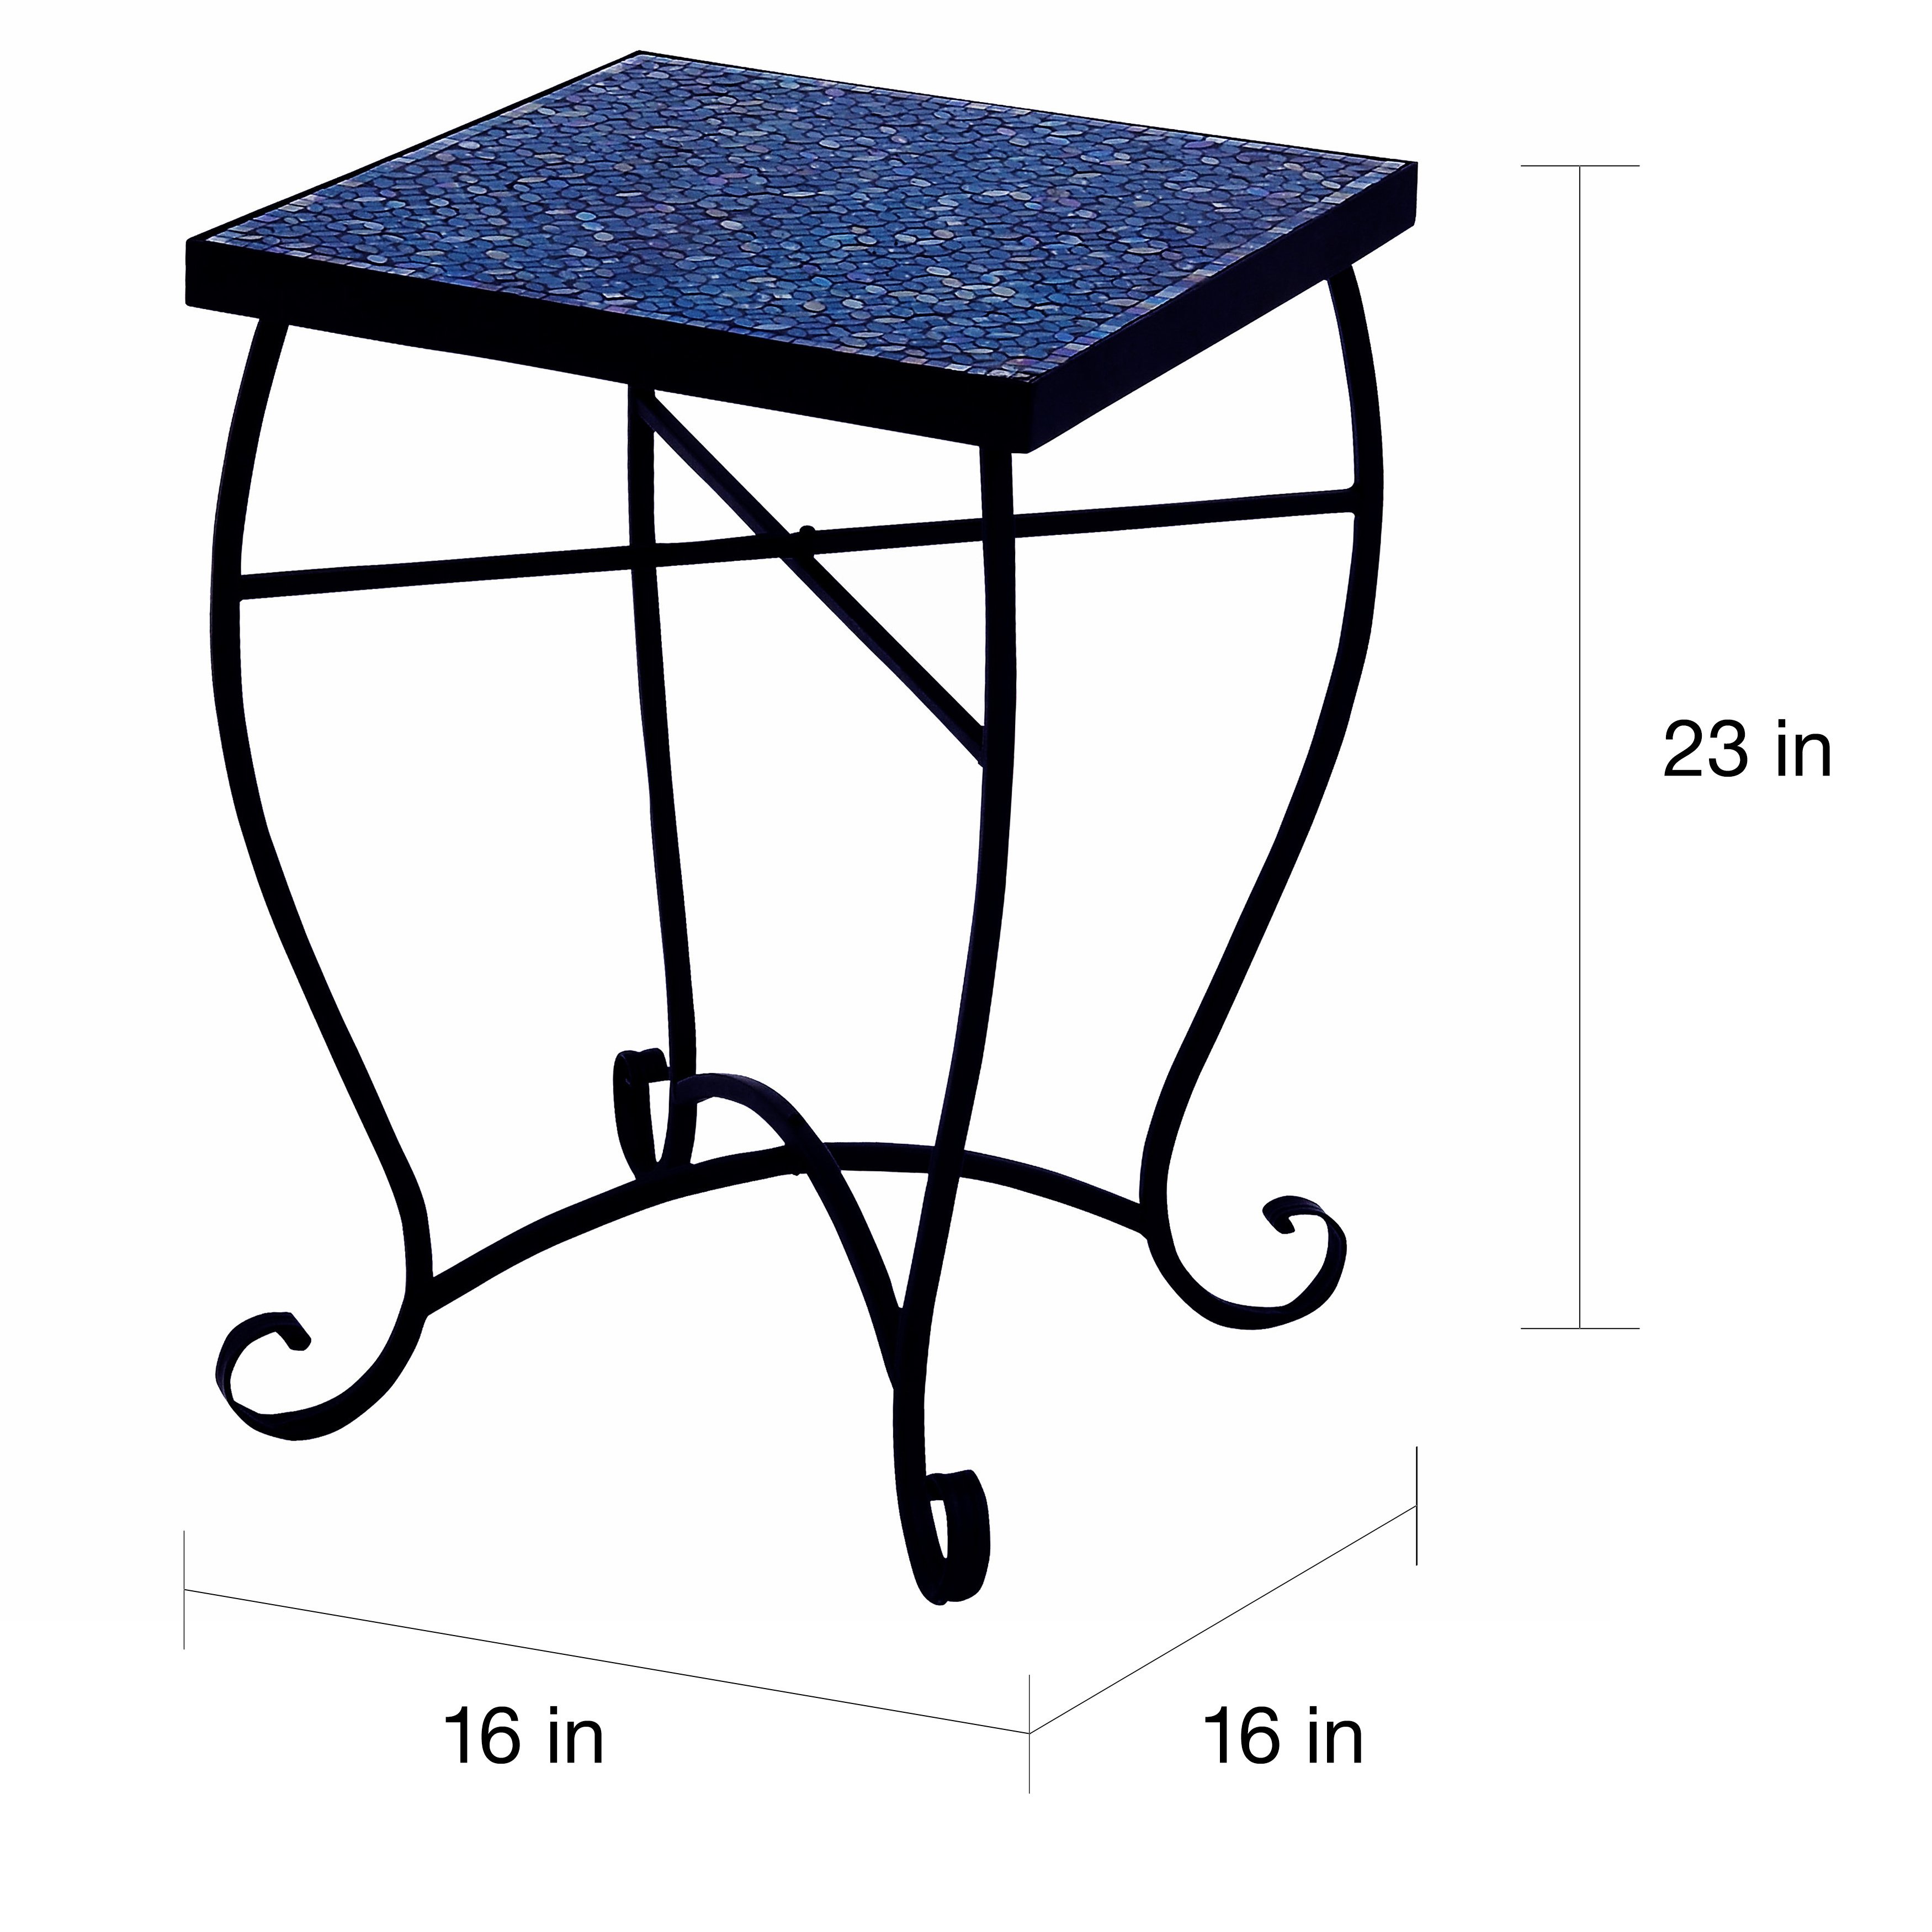 moroccan mosaic blue square side accent table free shipping metal today small with drawers pebble clear plexiglass coffee drink cooler teal furniture pineapple lamp computer